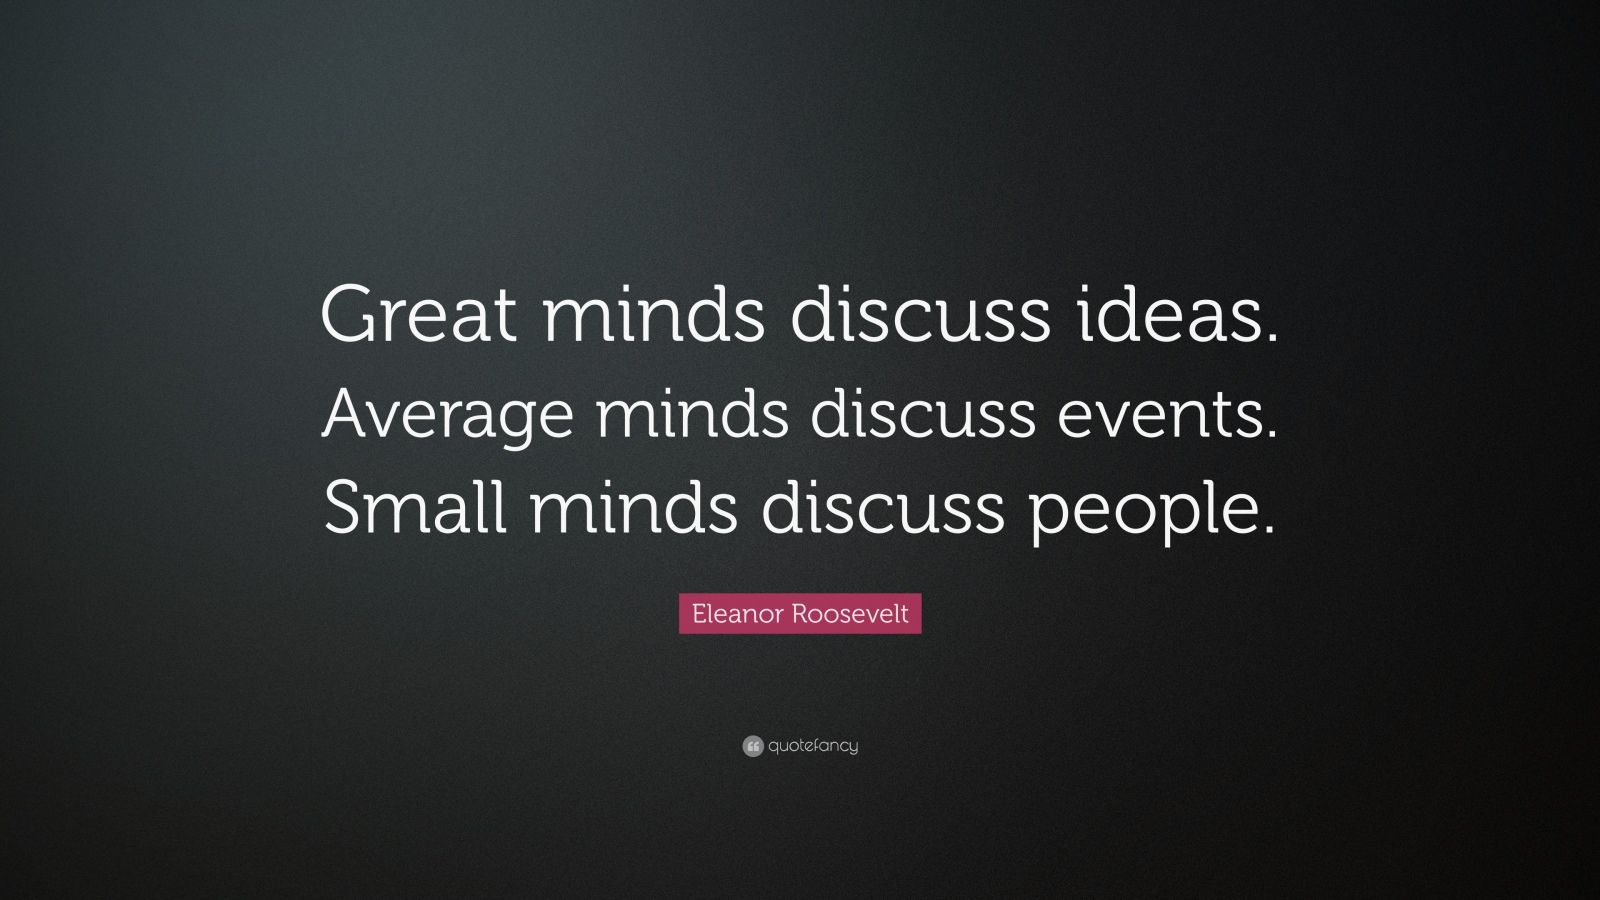 Eleanor Roosevelt Quote: “Great minds discuss ideas. Average minds